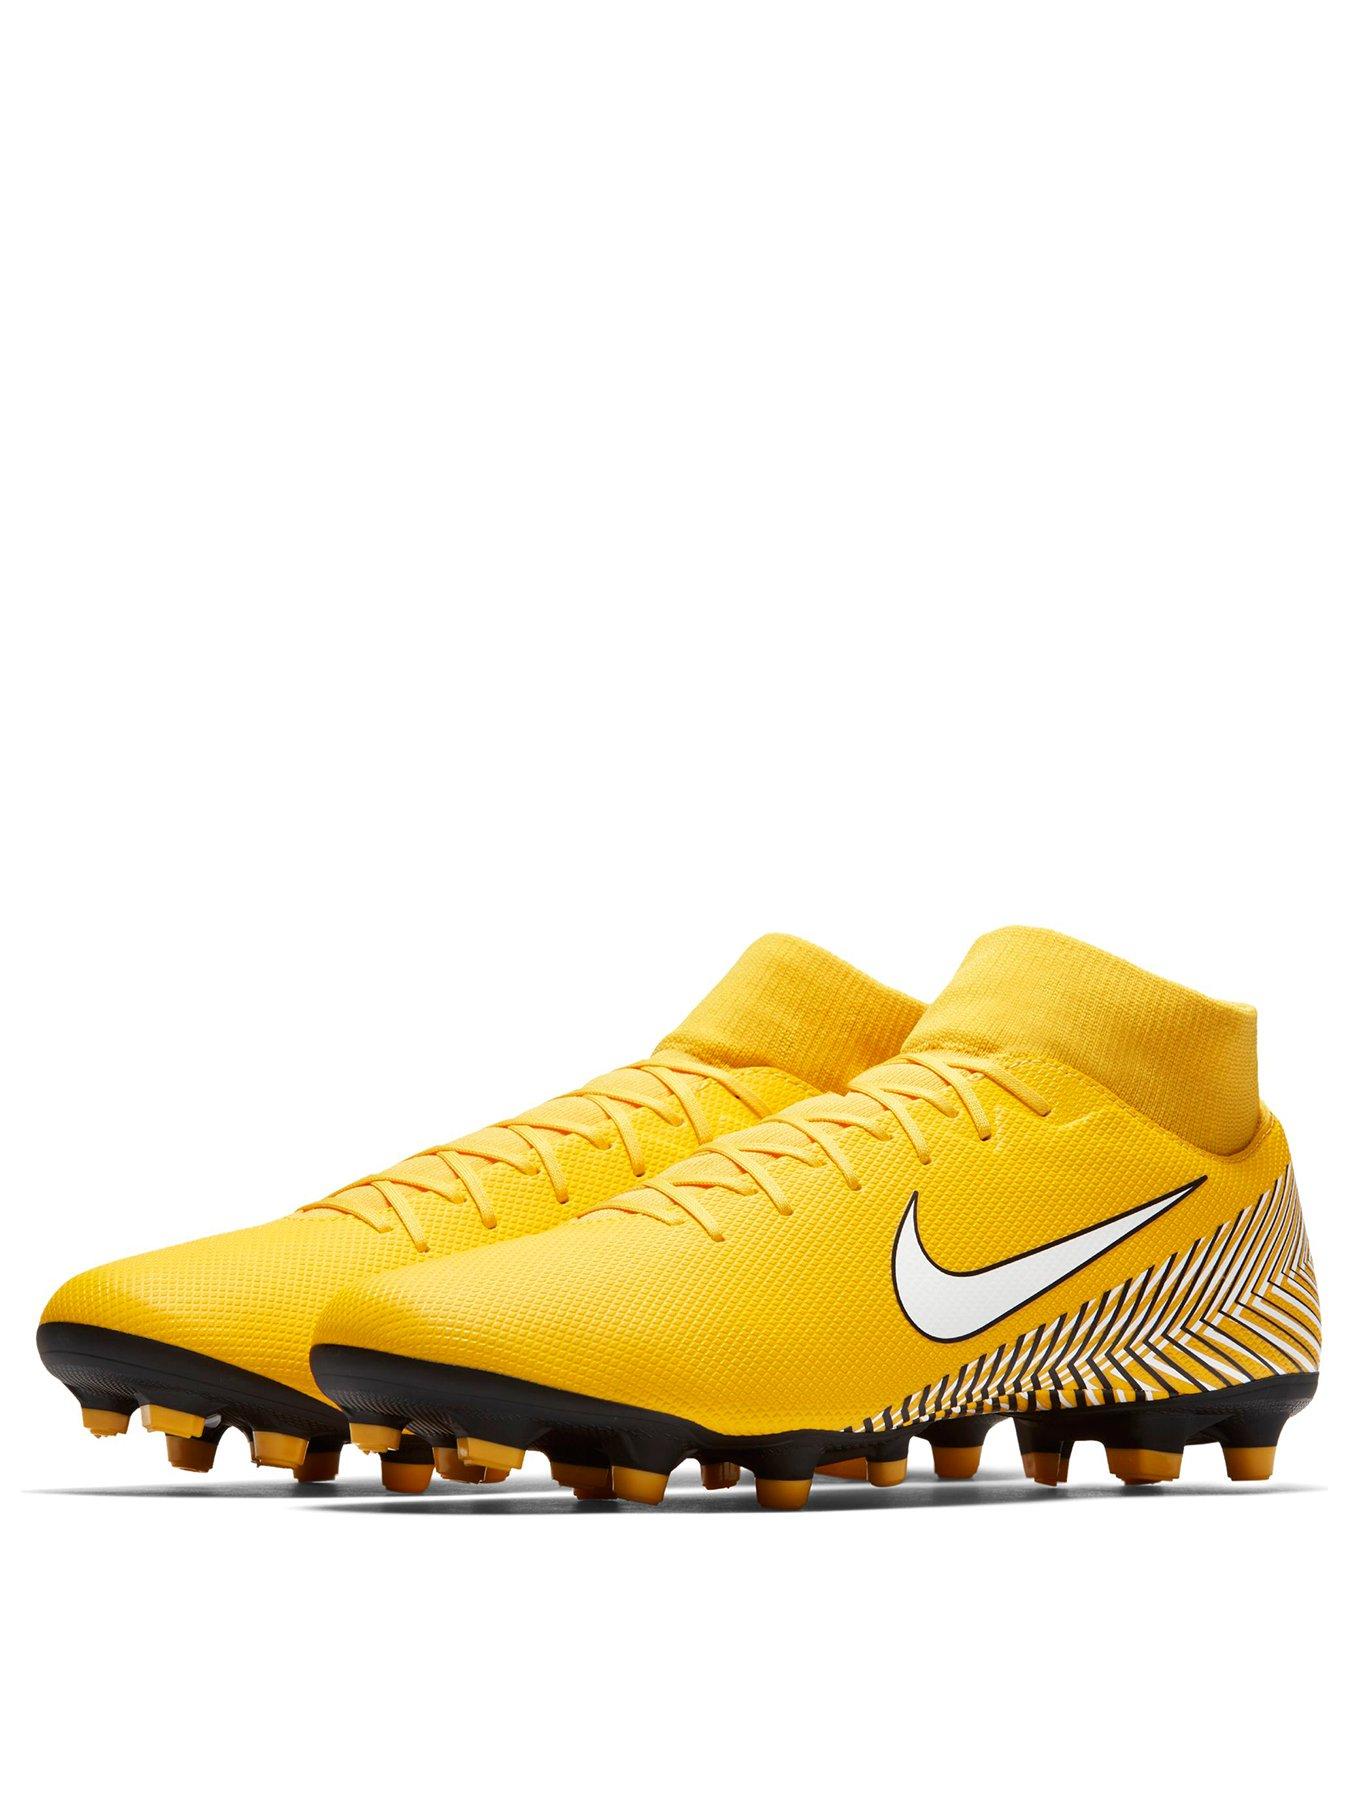 7 Next Gen Nike Mercurial Superfly 2018 Concept Leaked